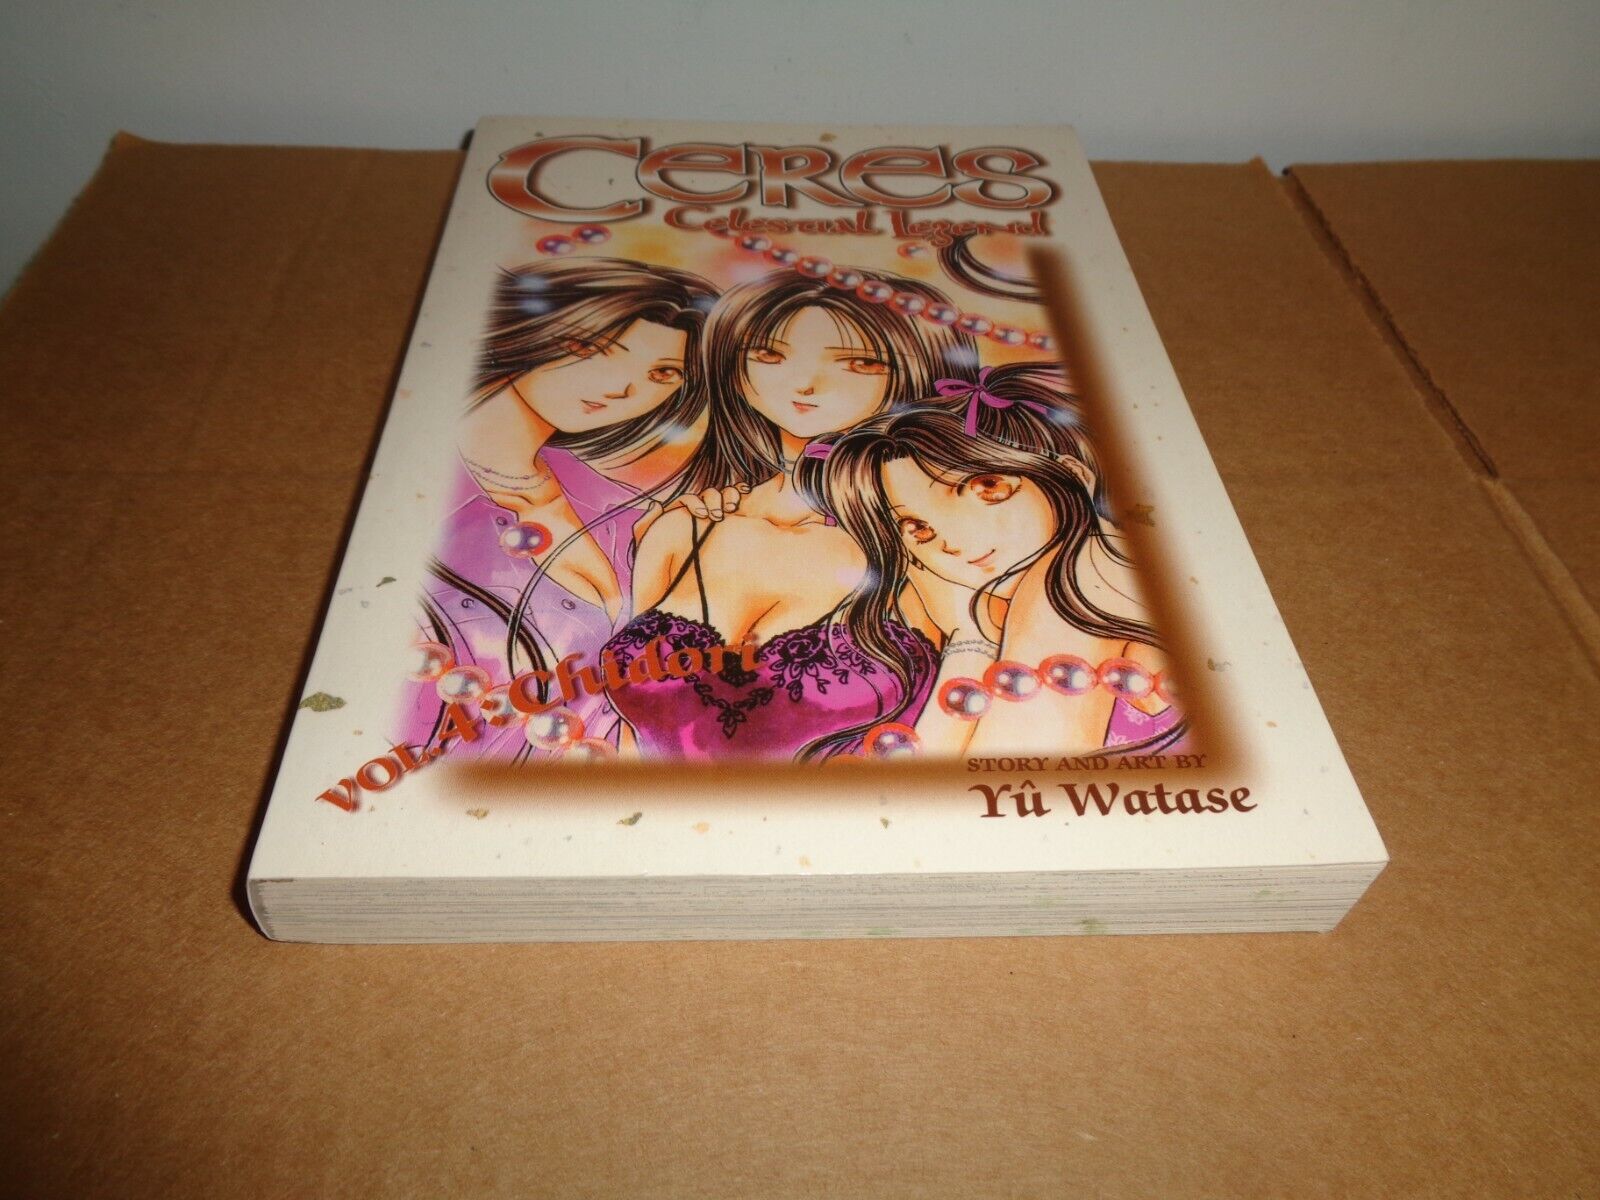 Ceres: Celestial Legend Vol. 4 (1st Edition) by Yuu Watase Manga Book in English